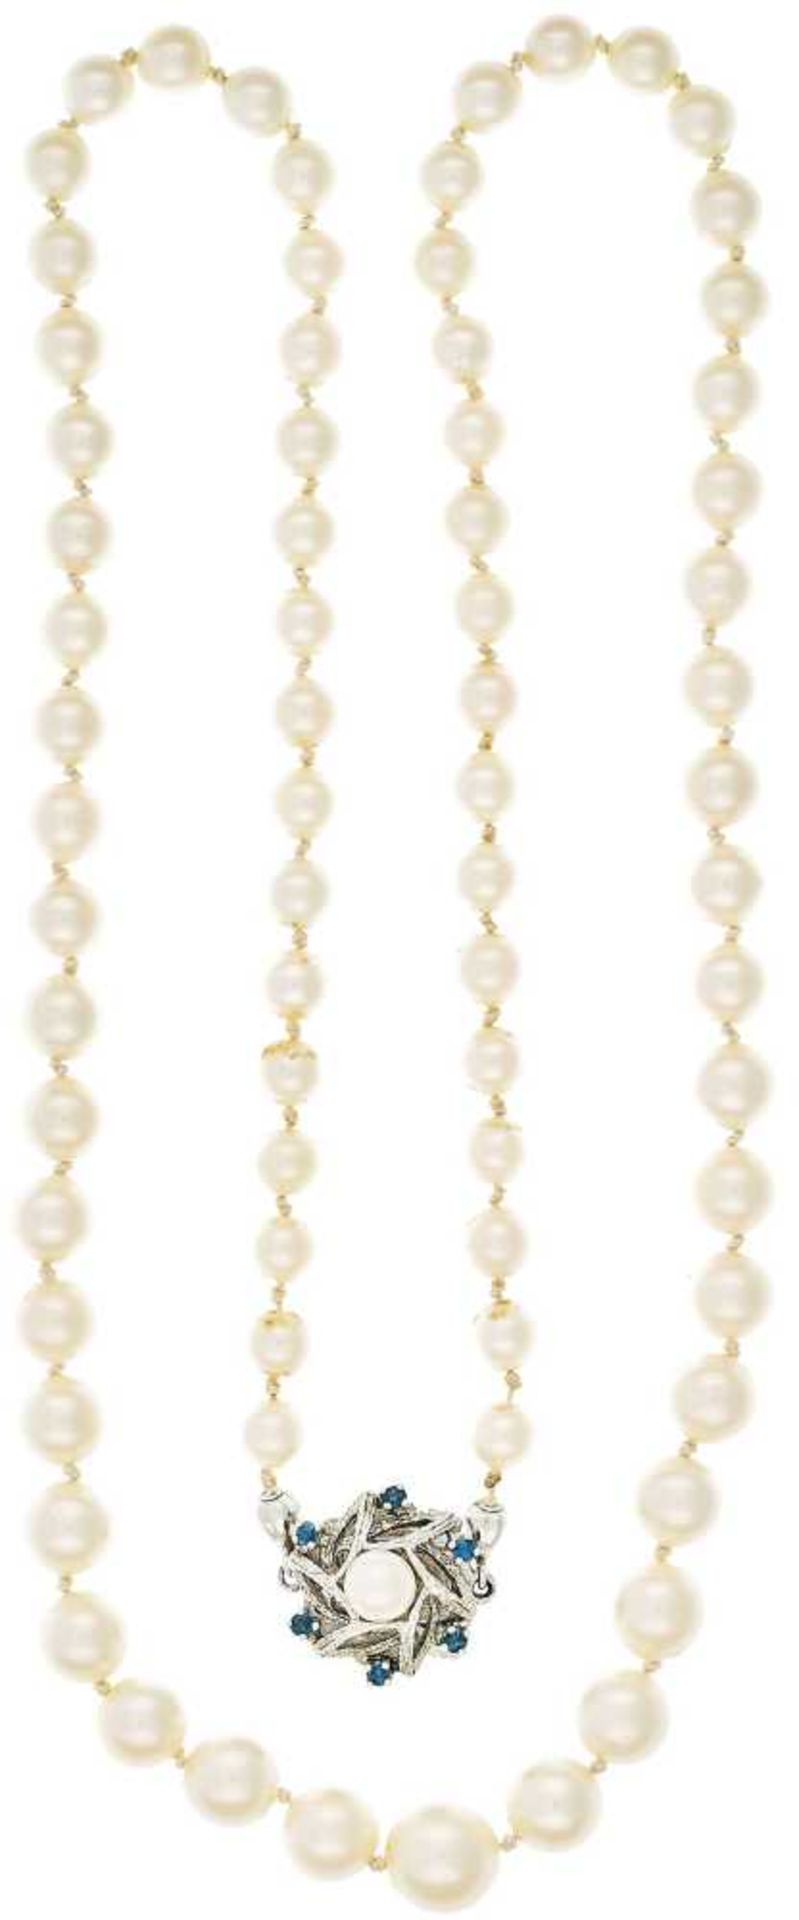 Akoya pearl chain from 74 saltwater pearls in the course of with beautiful yellow rose chandelier, D